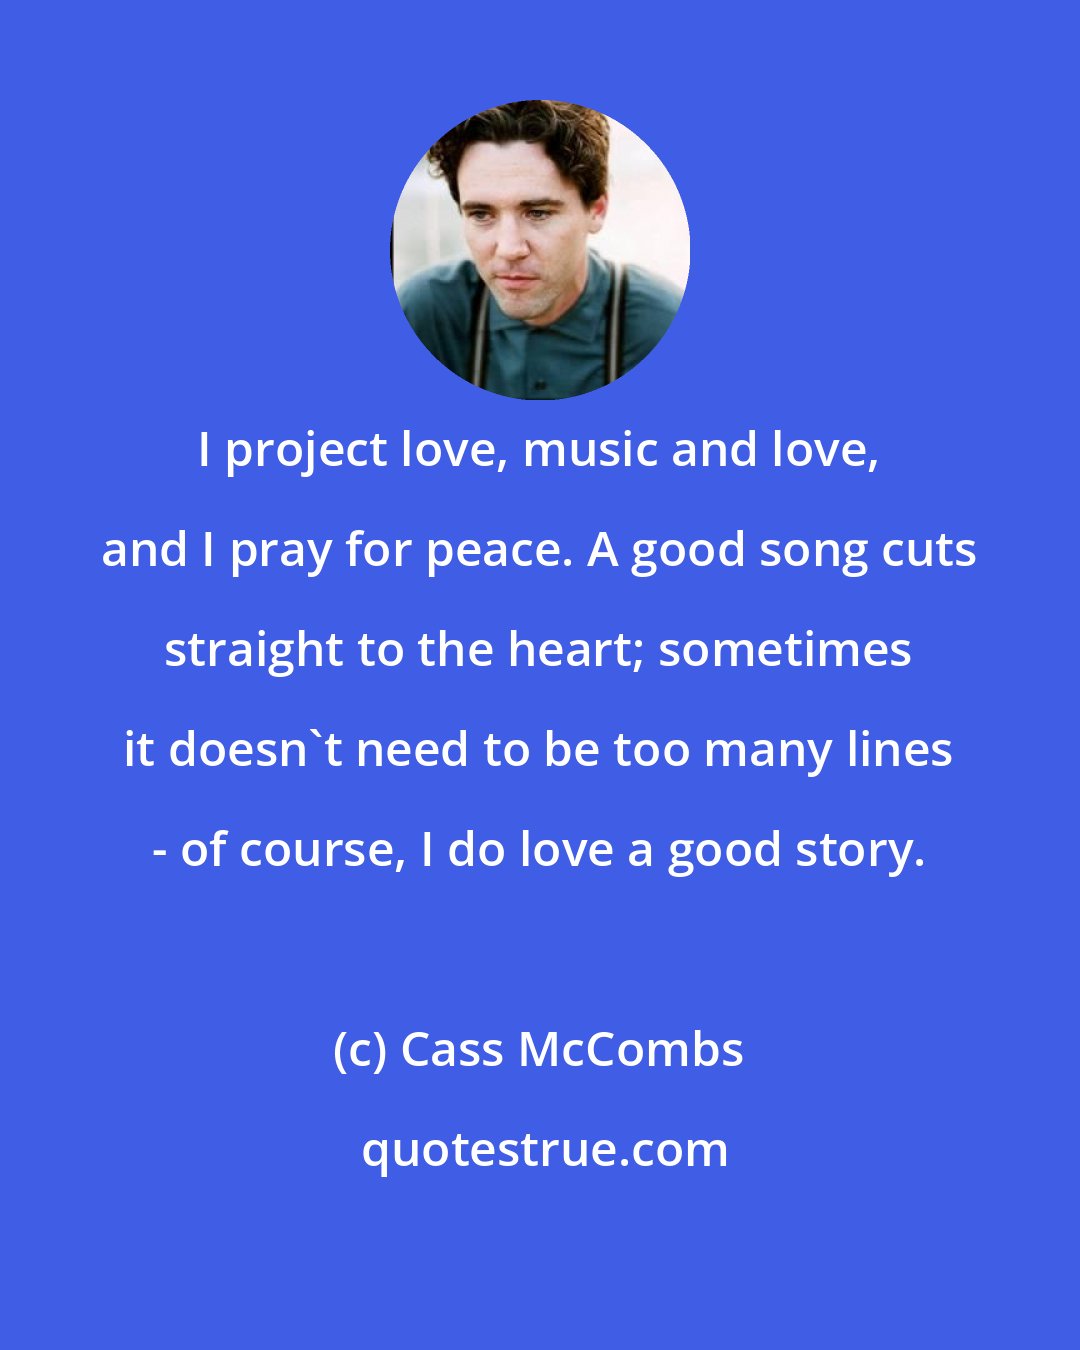 Cass McCombs: I project love, music and love, and I pray for peace. A good song cuts straight to the heart; sometimes it doesn't need to be too many lines - of course, I do love a good story.